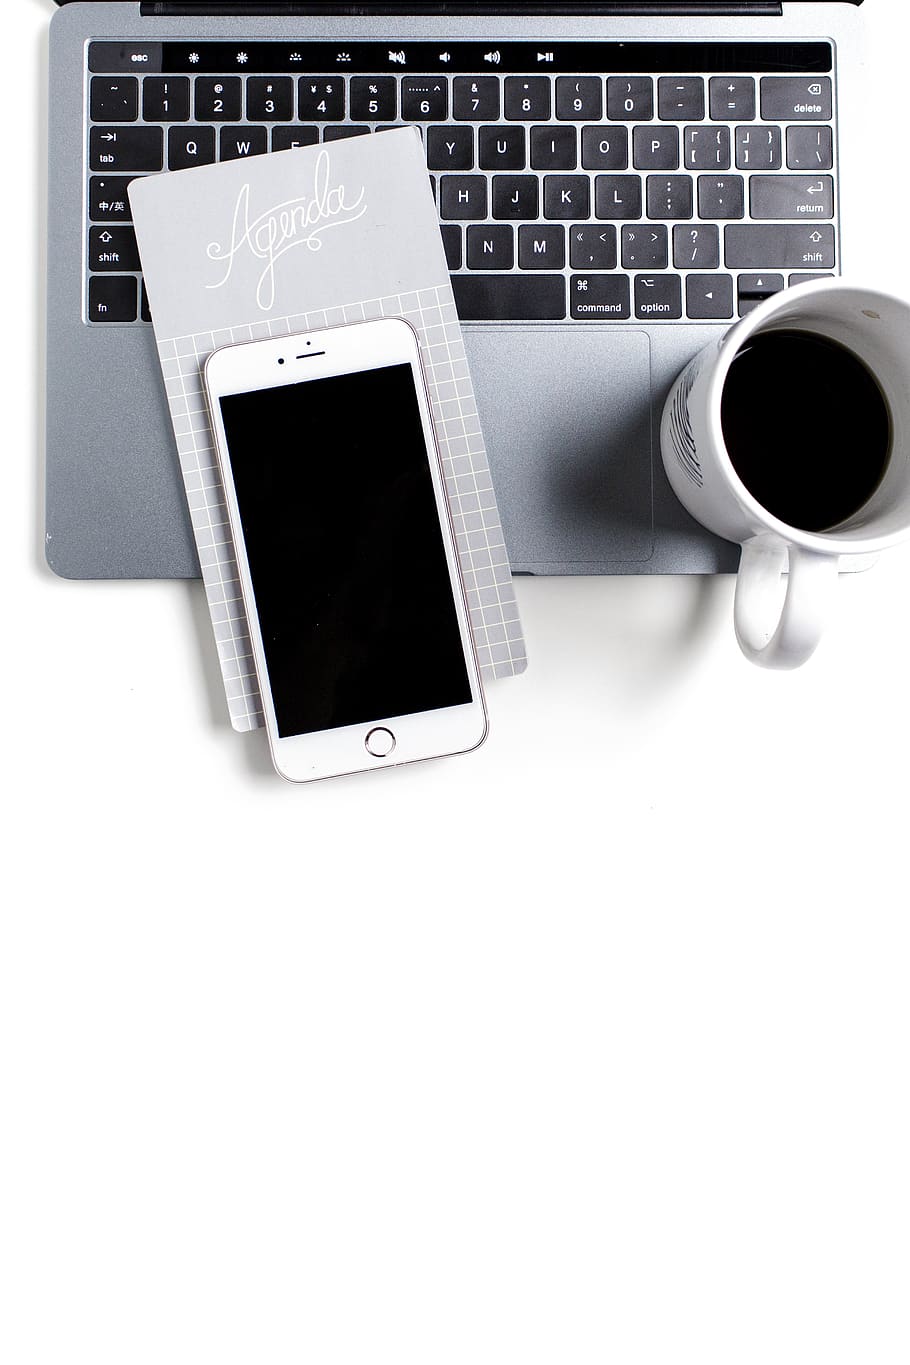 iphone x, laptop, coffee, blog stock, technology, wireless technology, drink, computer, cup, connection